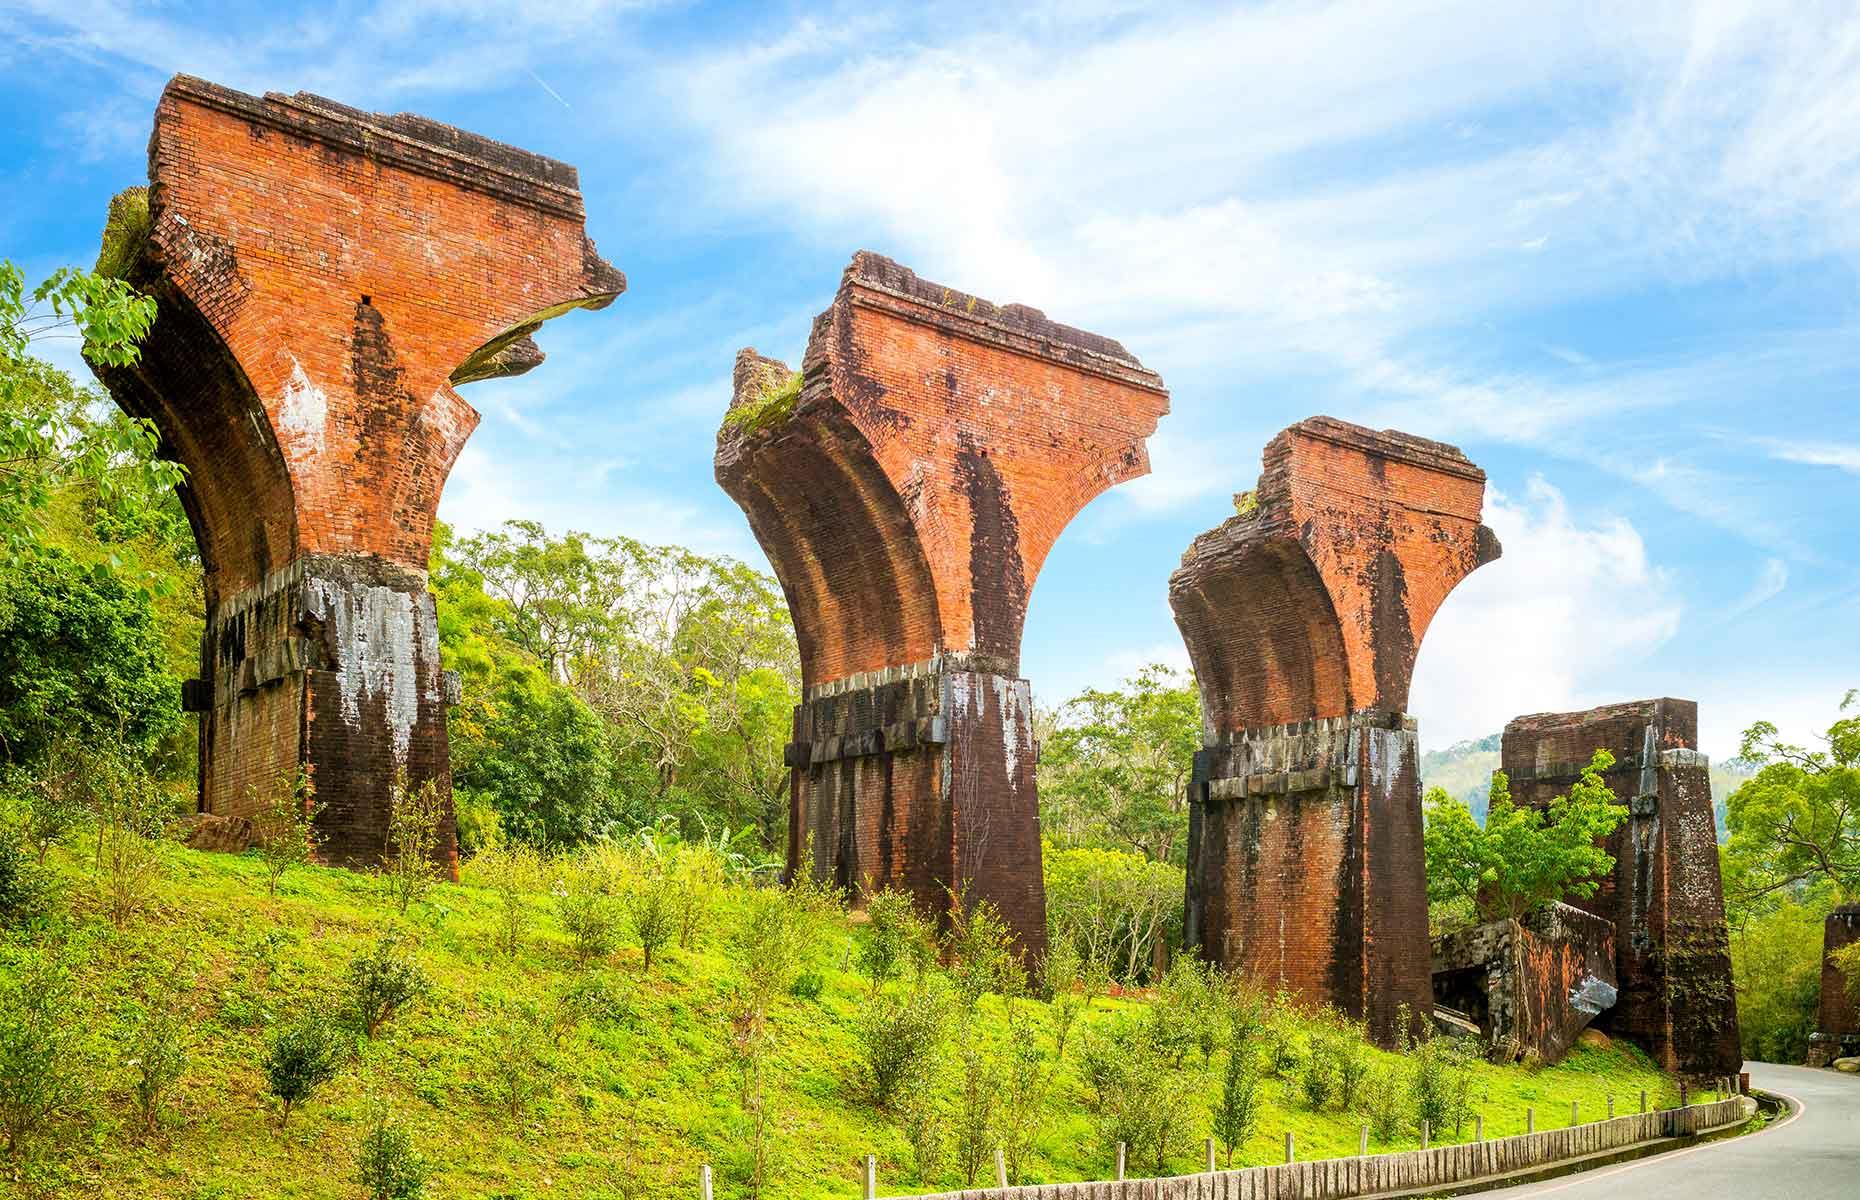 <p>The remains of Longteng Bridge are a strong reminder of the power of Mother Nature. When the bridge was first built in 1905, the workers used glutinous rice instead of cement to hold the bricks together. An earthquake in 1935 damaged the 164-foot-high (50m) bridge beyond repair and a second steel replacement was built beside it. The latter was then damaged too by a second earthquake in 1999. Still, at least there’s a silver lining: today it’s a popular tourist sight and wedding photography hot spot.</p>